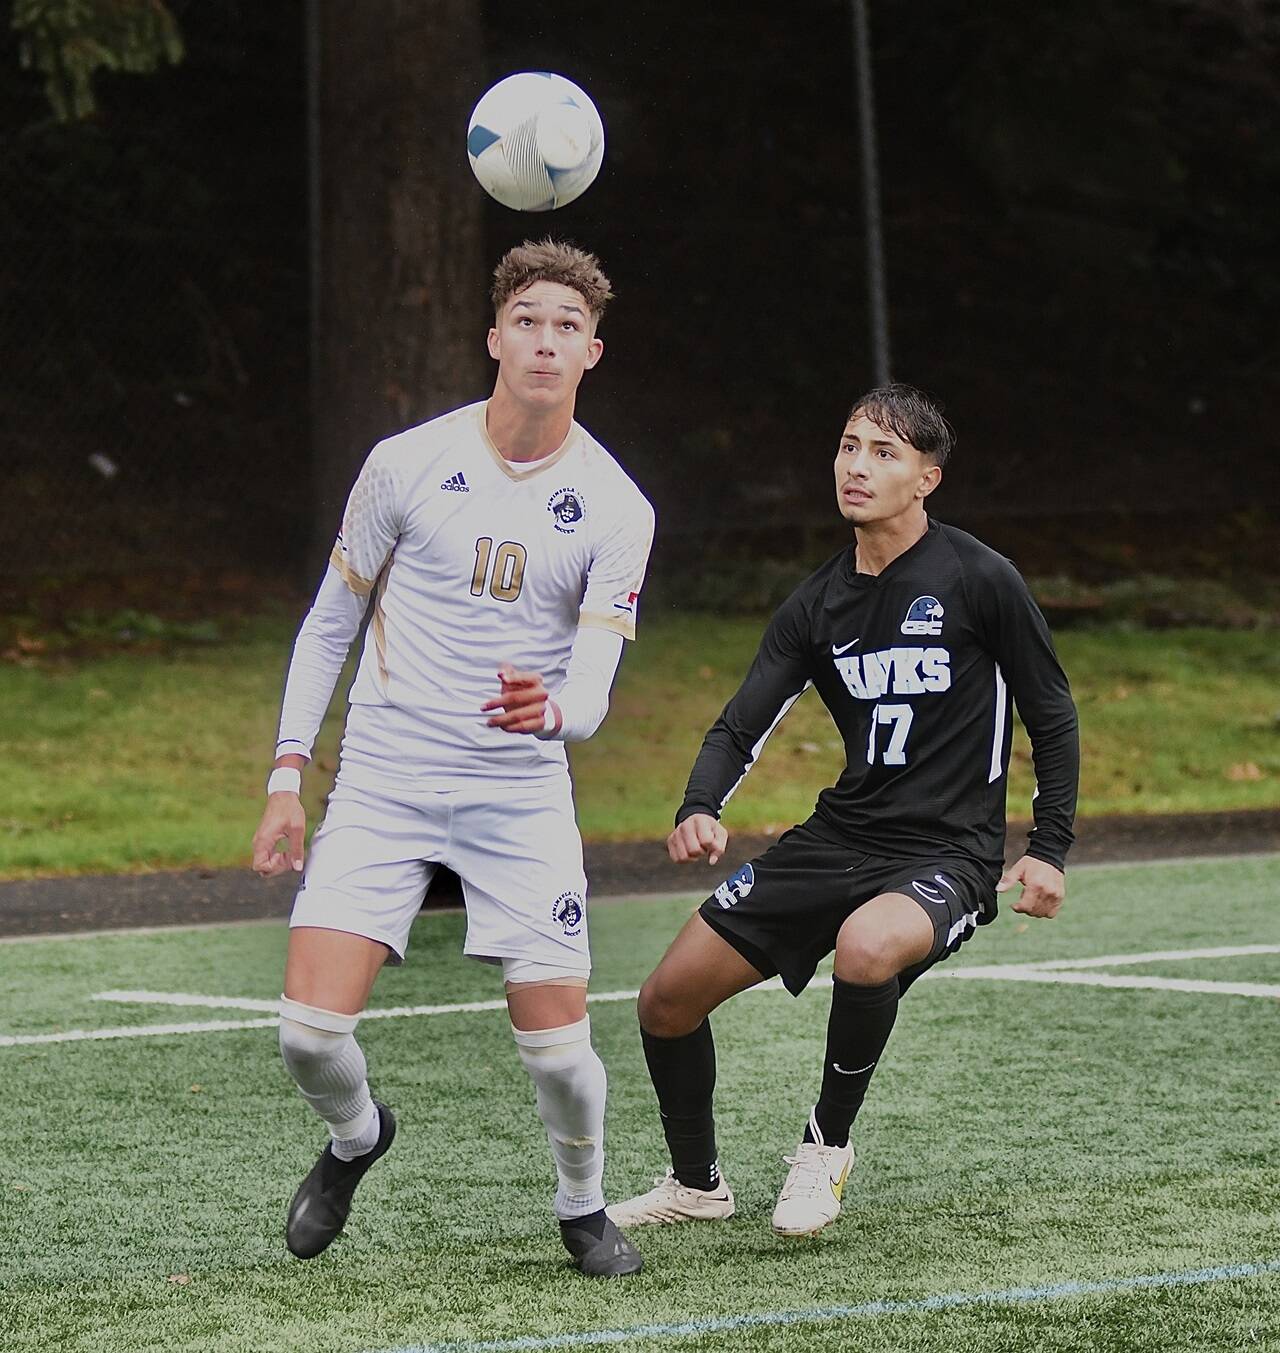 Peninsula College’s Nil Grau (10), looks to control the ball against Columbia Basin’s Jonas Olvera (17) in the NWAC semifinals held Friday in Tukwila. Grau scored the only goal of the game in a 1-0 victory, sending the Peninsula men into the NWAC finals at 1:30 p.m. Sunday against Highline. (Jay Cline/Peninsula College)